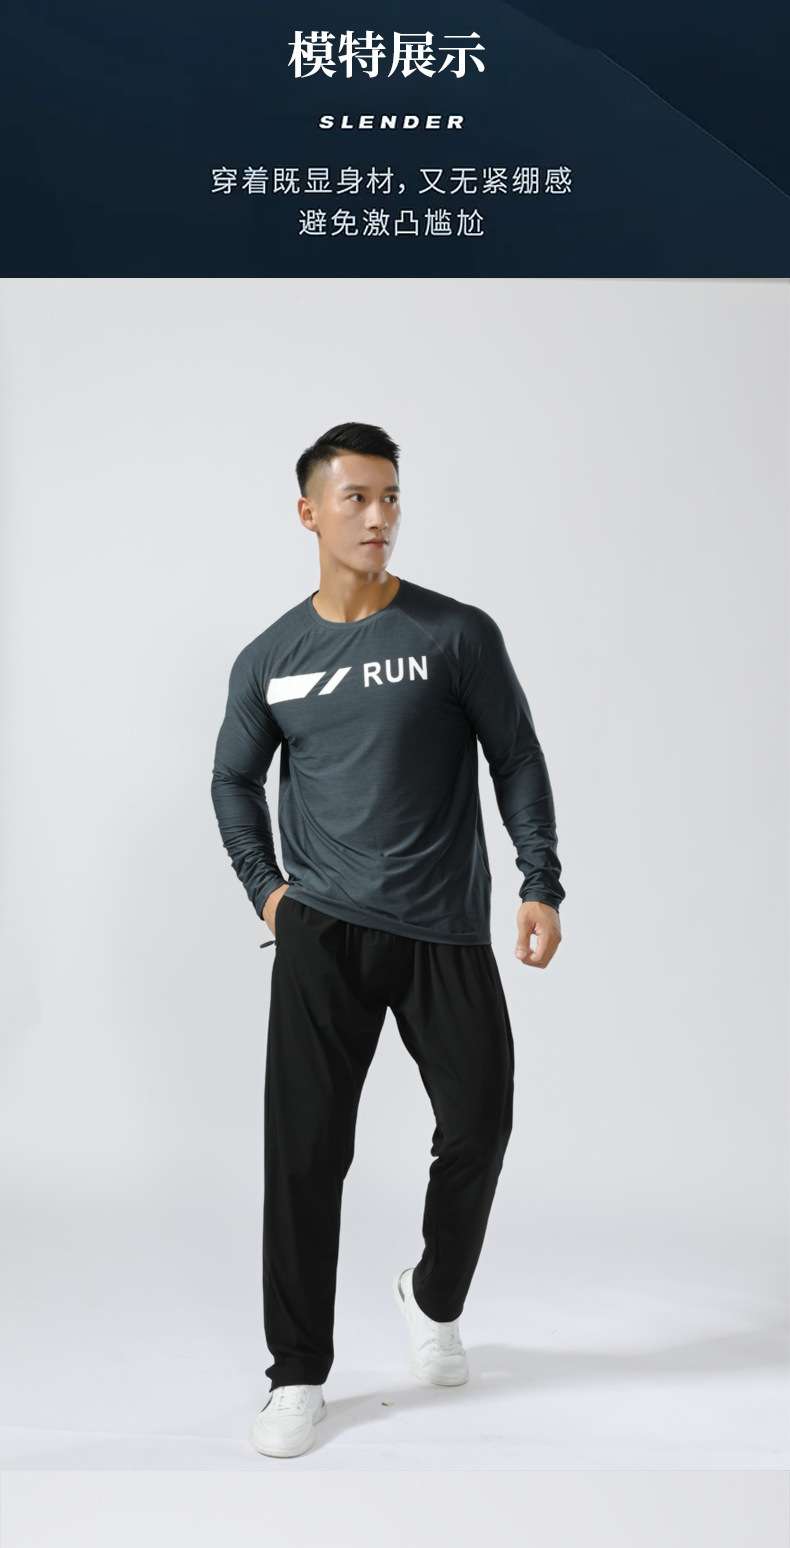 2022 new round neck long-sleeved sports running T-shirt men's fitness casual bottoming shirt quick-drying elastic printing top